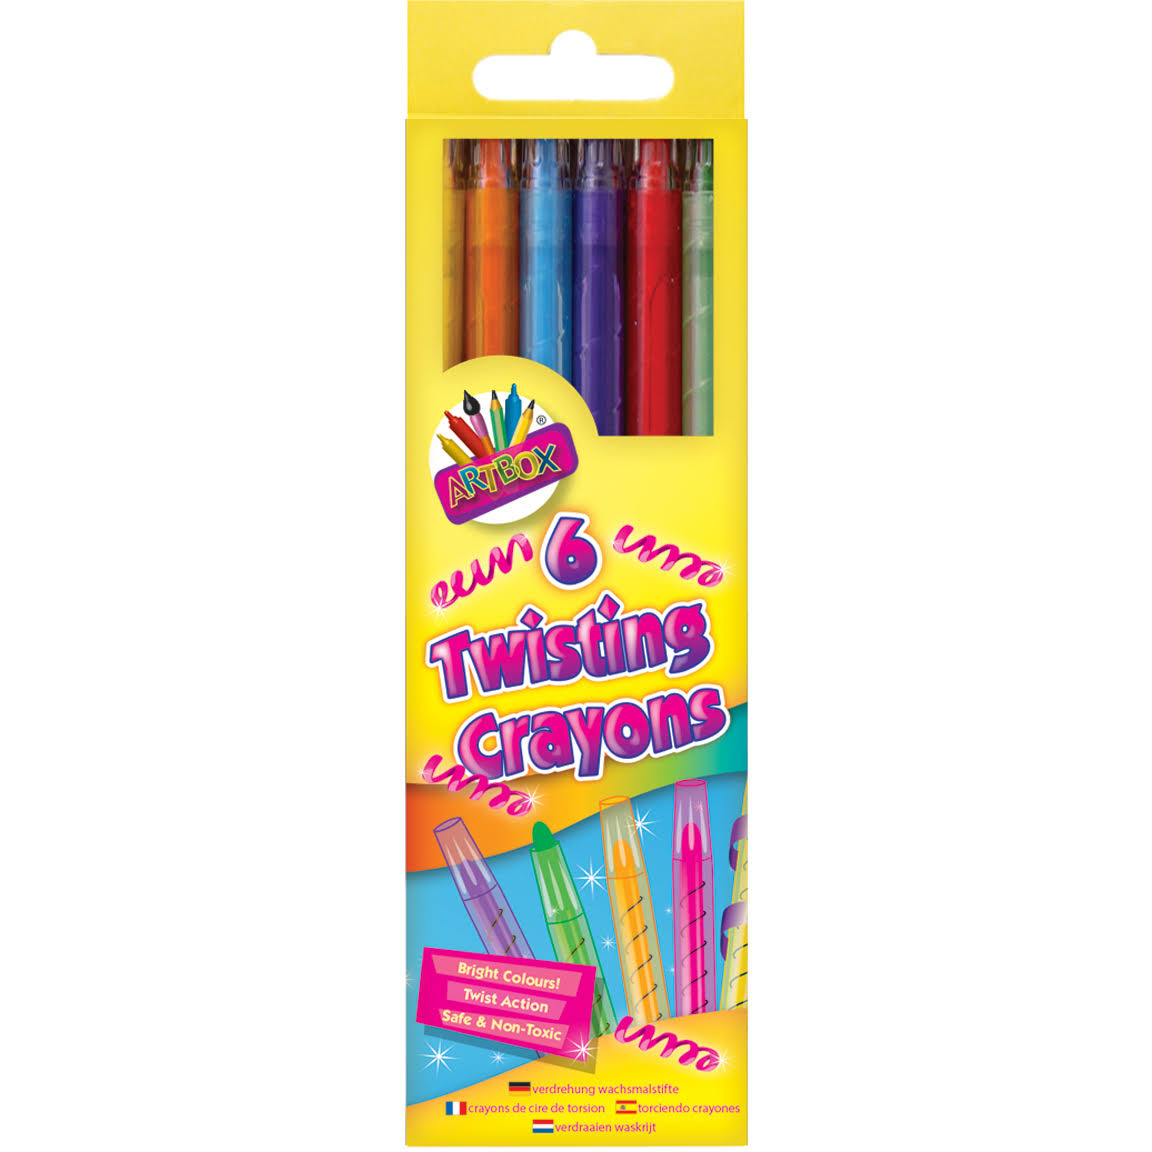 Pack of 6 Twisting Crayons